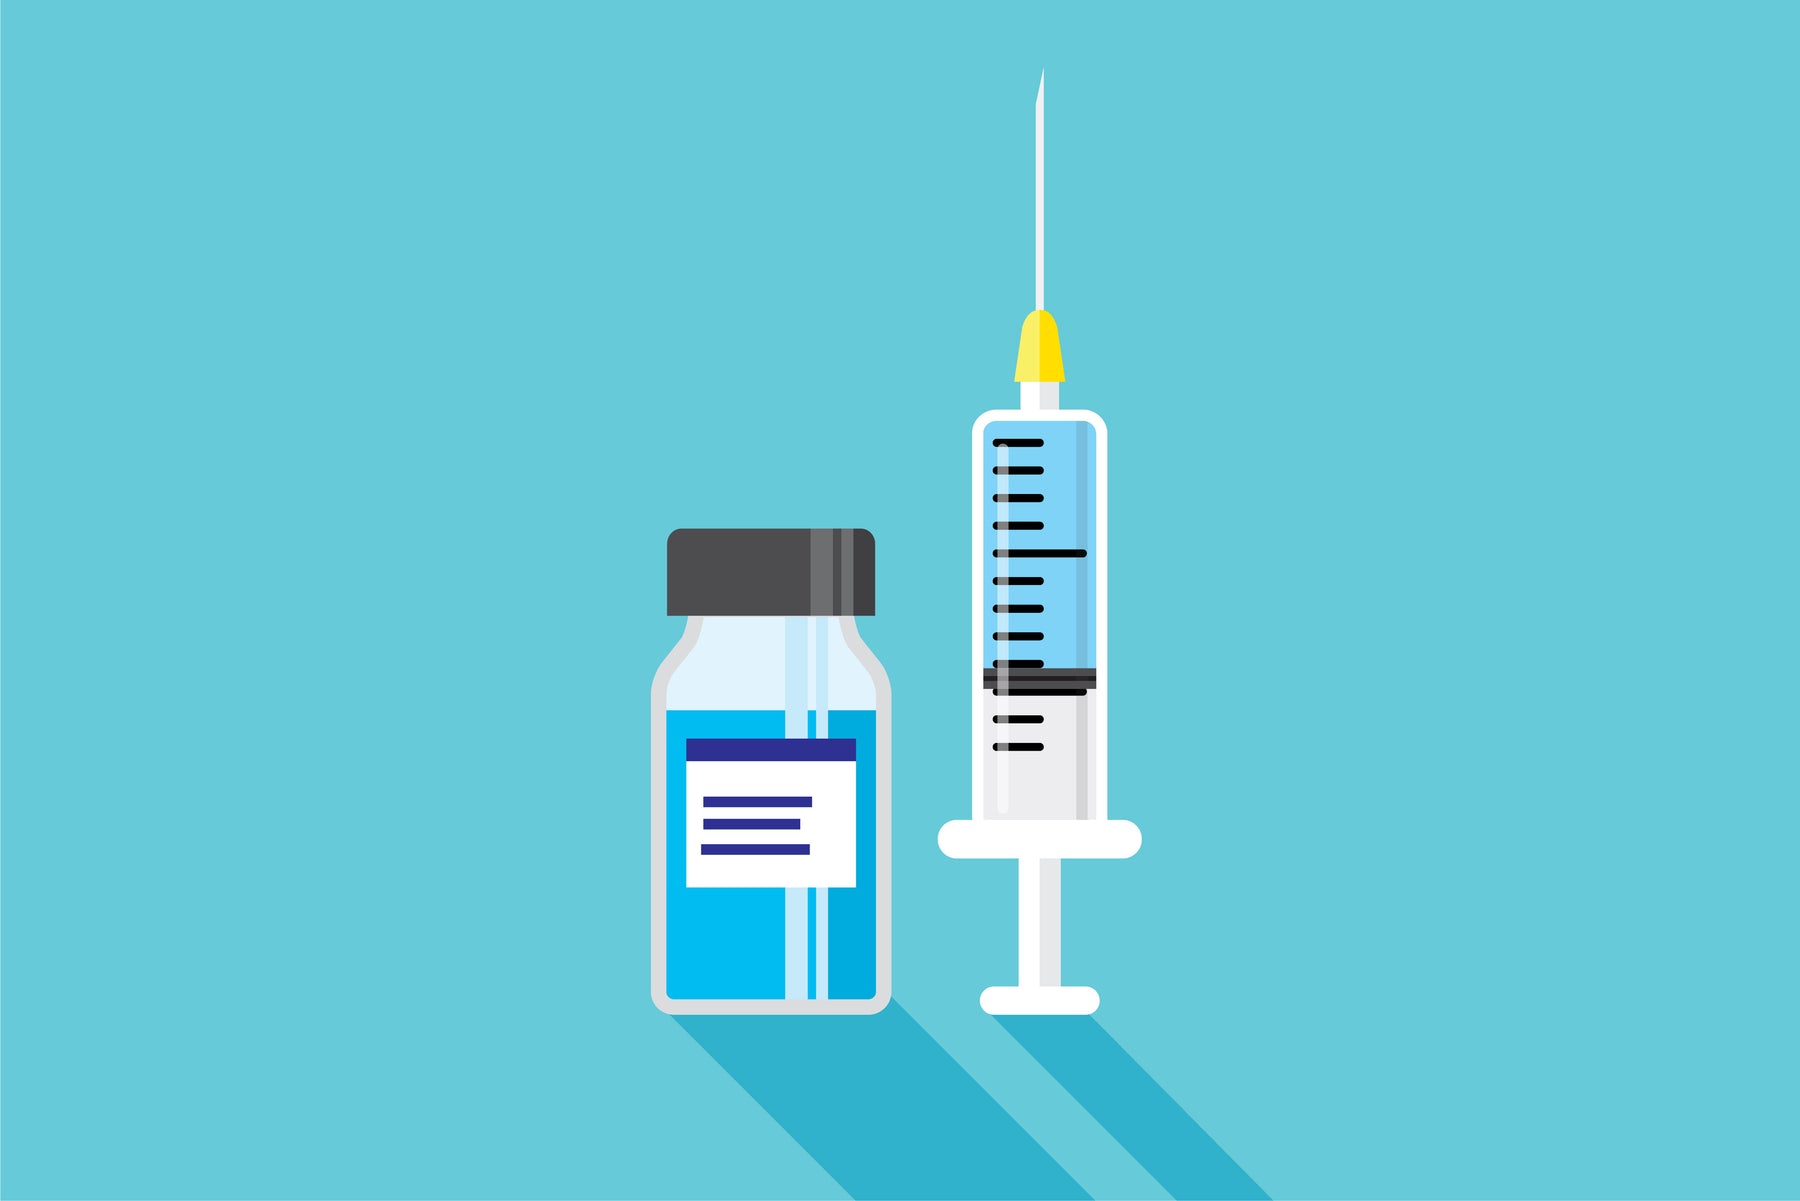 Illustration of syringes with the text "LDS Syringes increase the number of doses from each vial""